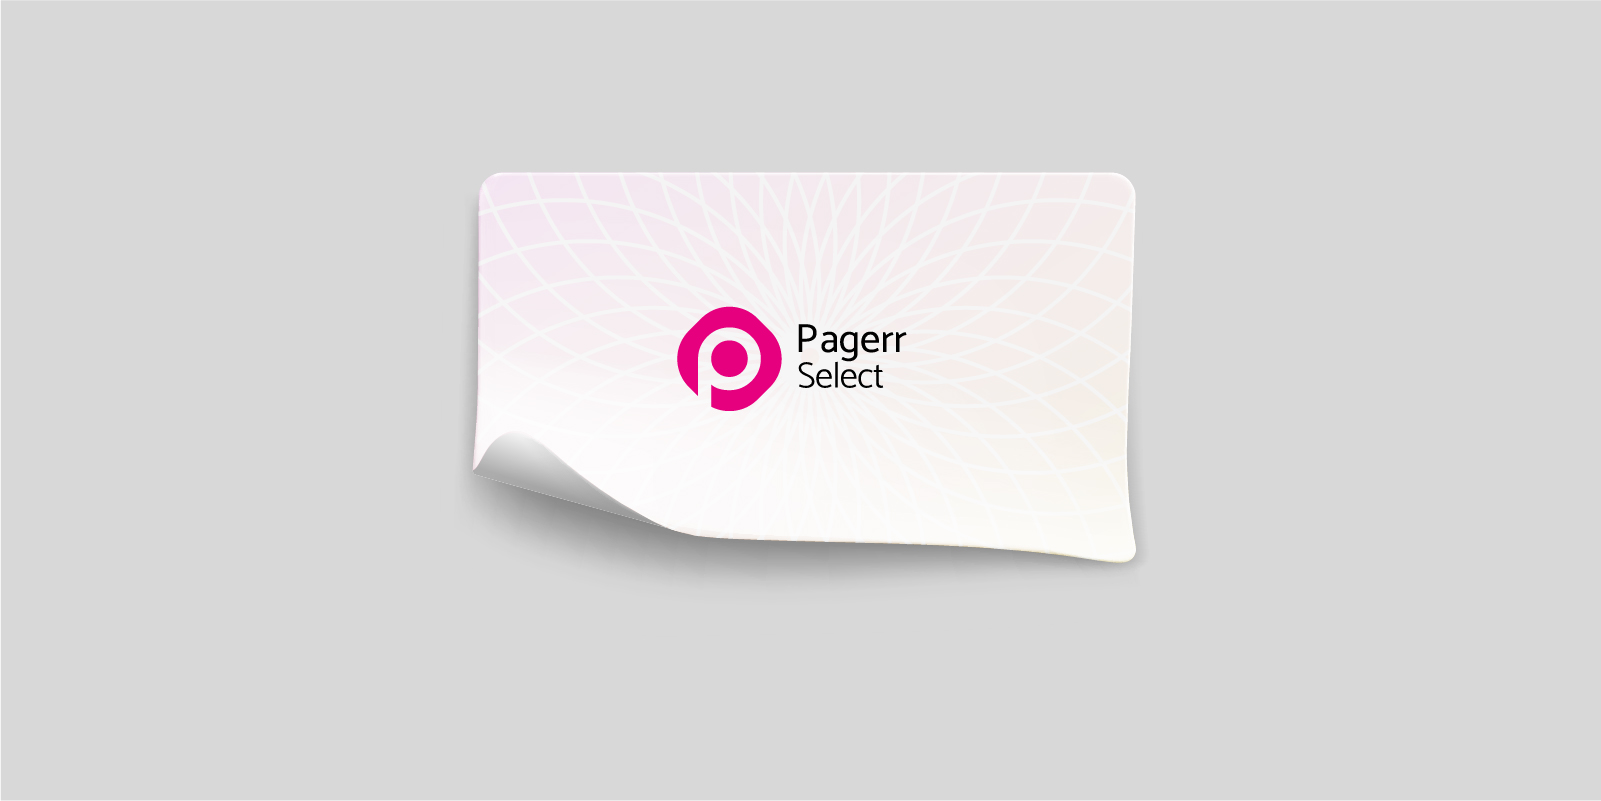 Sheet stickers in Madrid - Print with Pagerr